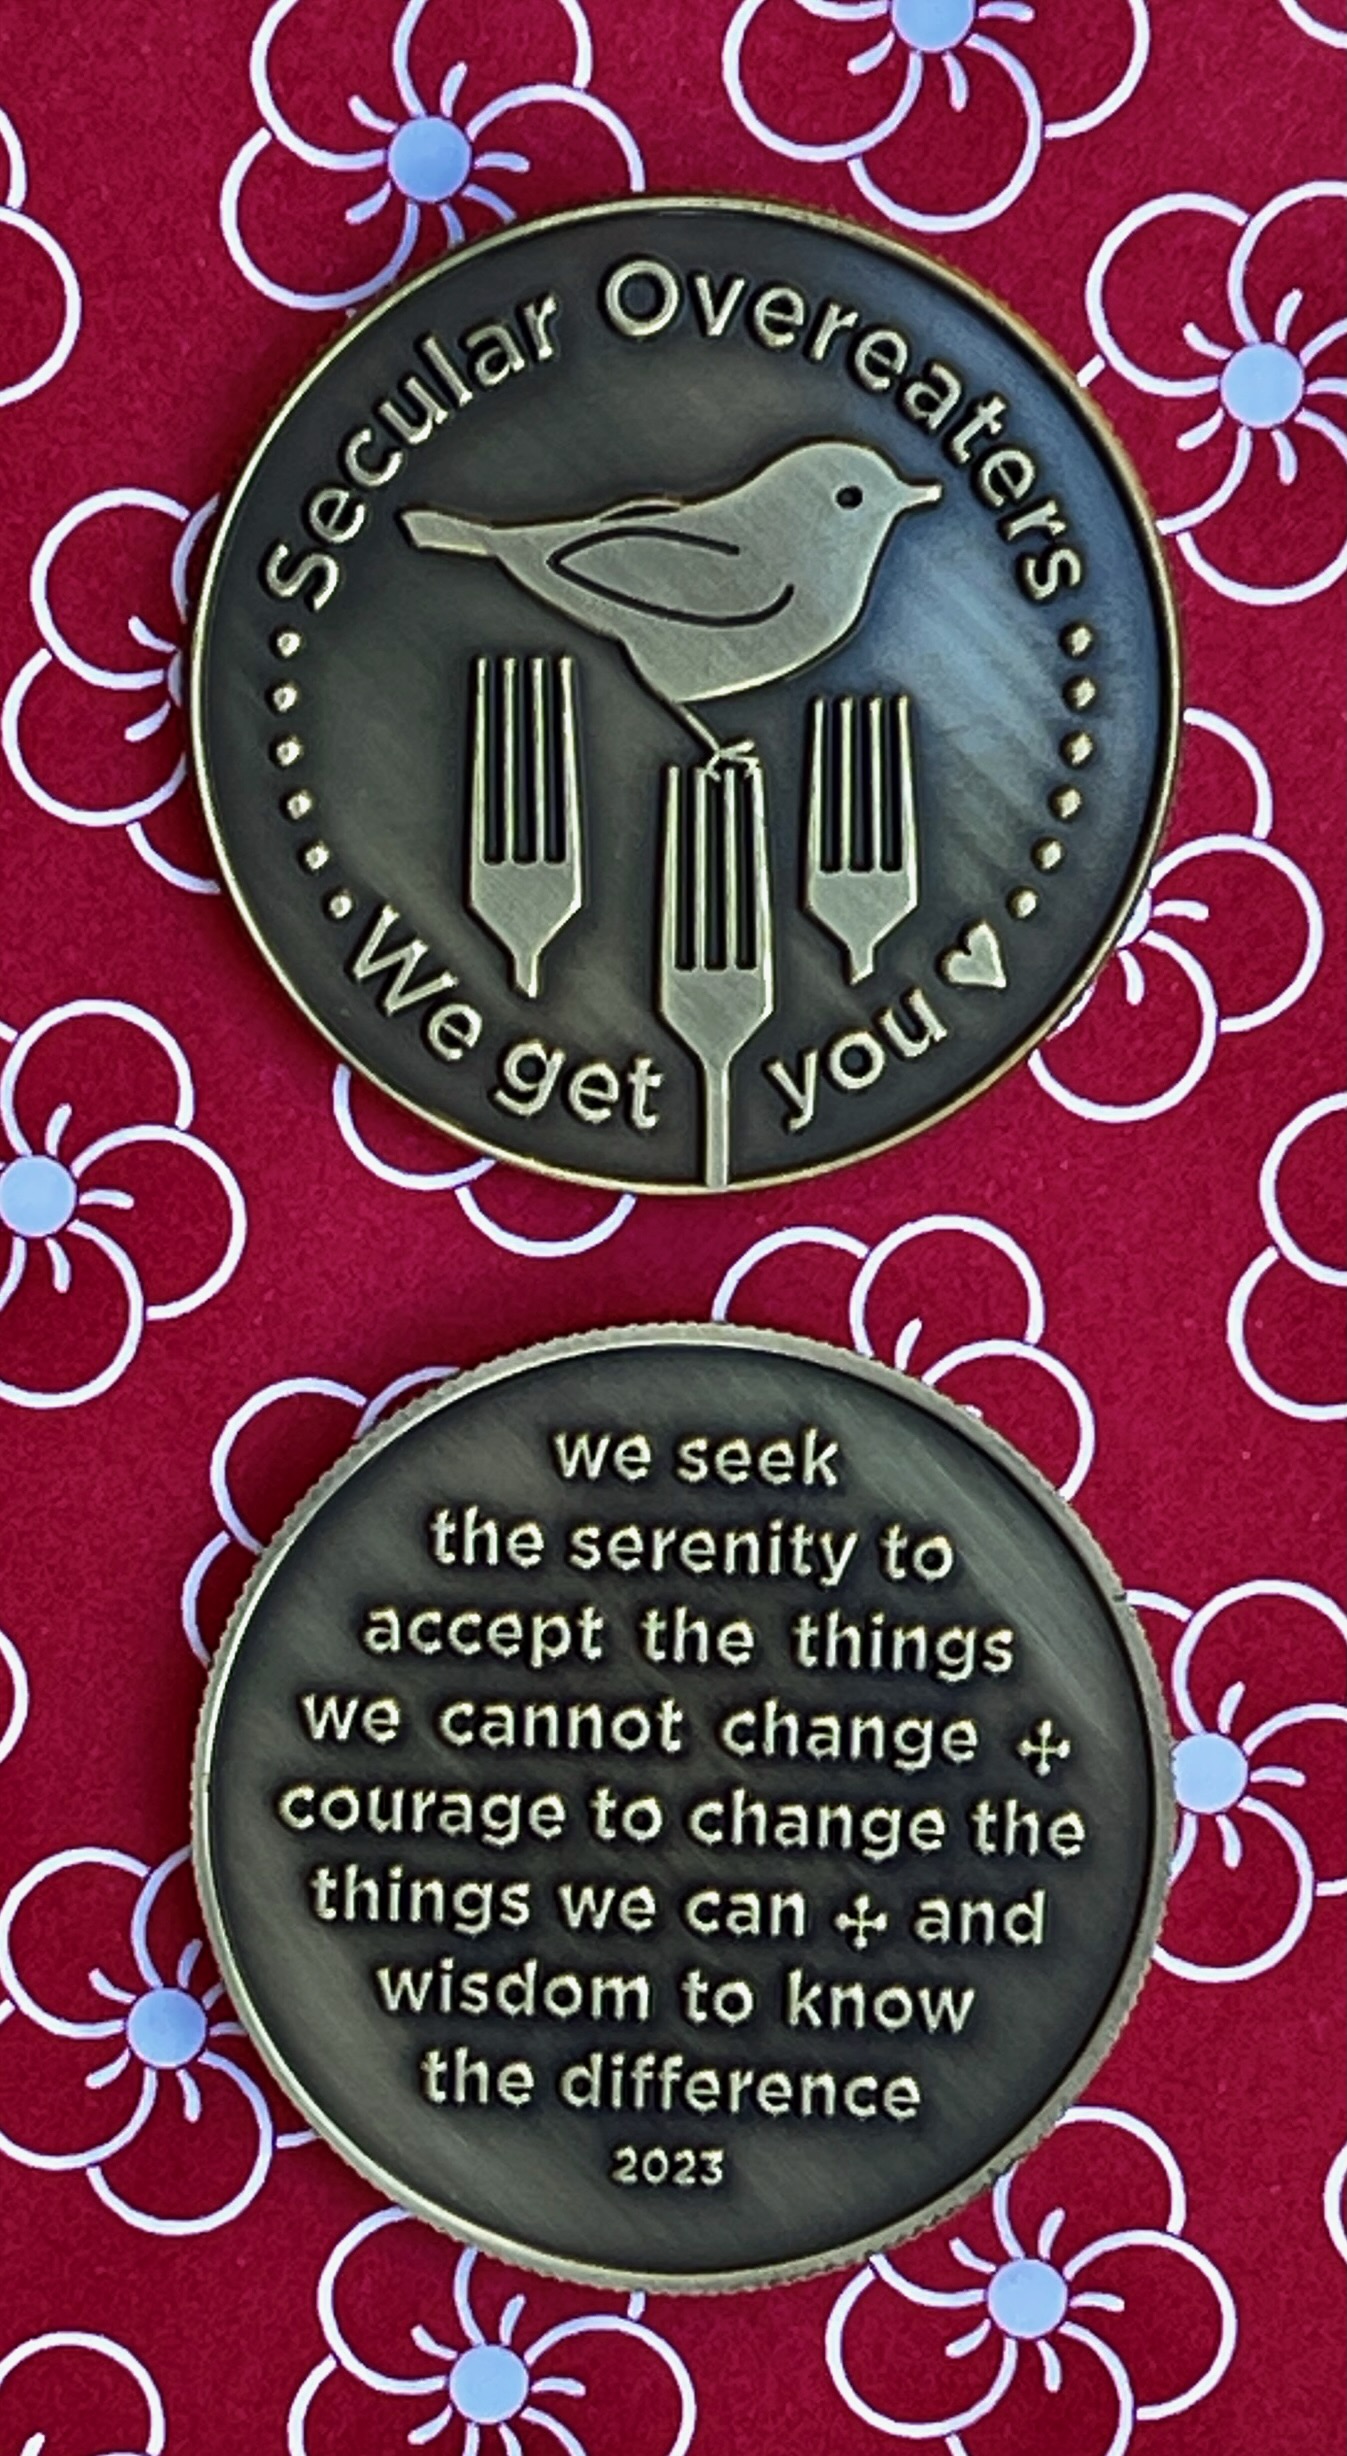 Photo of SO recovery chip includes image of bird with three forks and backside includes Serenity Poem: we seek the serenity to accept the things we cannot change, courage to change the things we can, and the wisdom to know the difference.